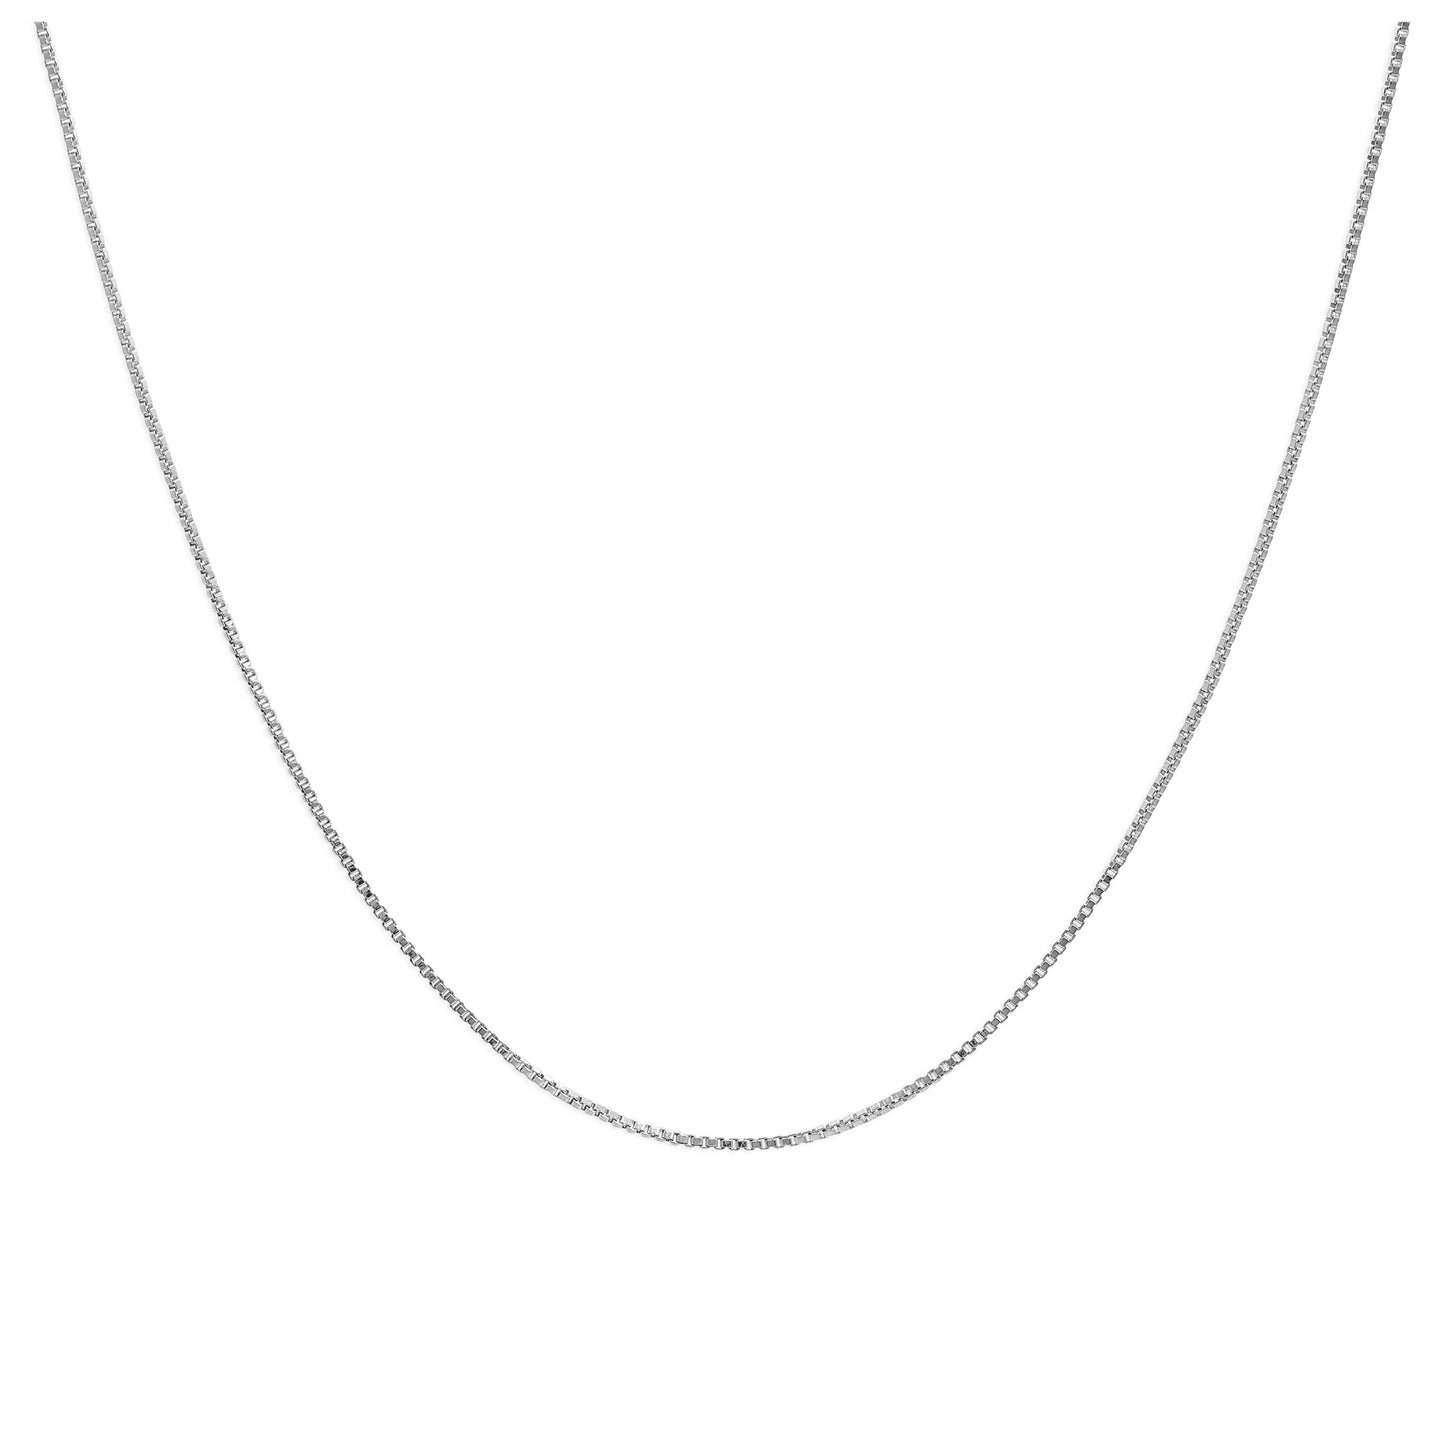 Sterling Silver Slider Clasp Box Chain any size up to 24 Inches